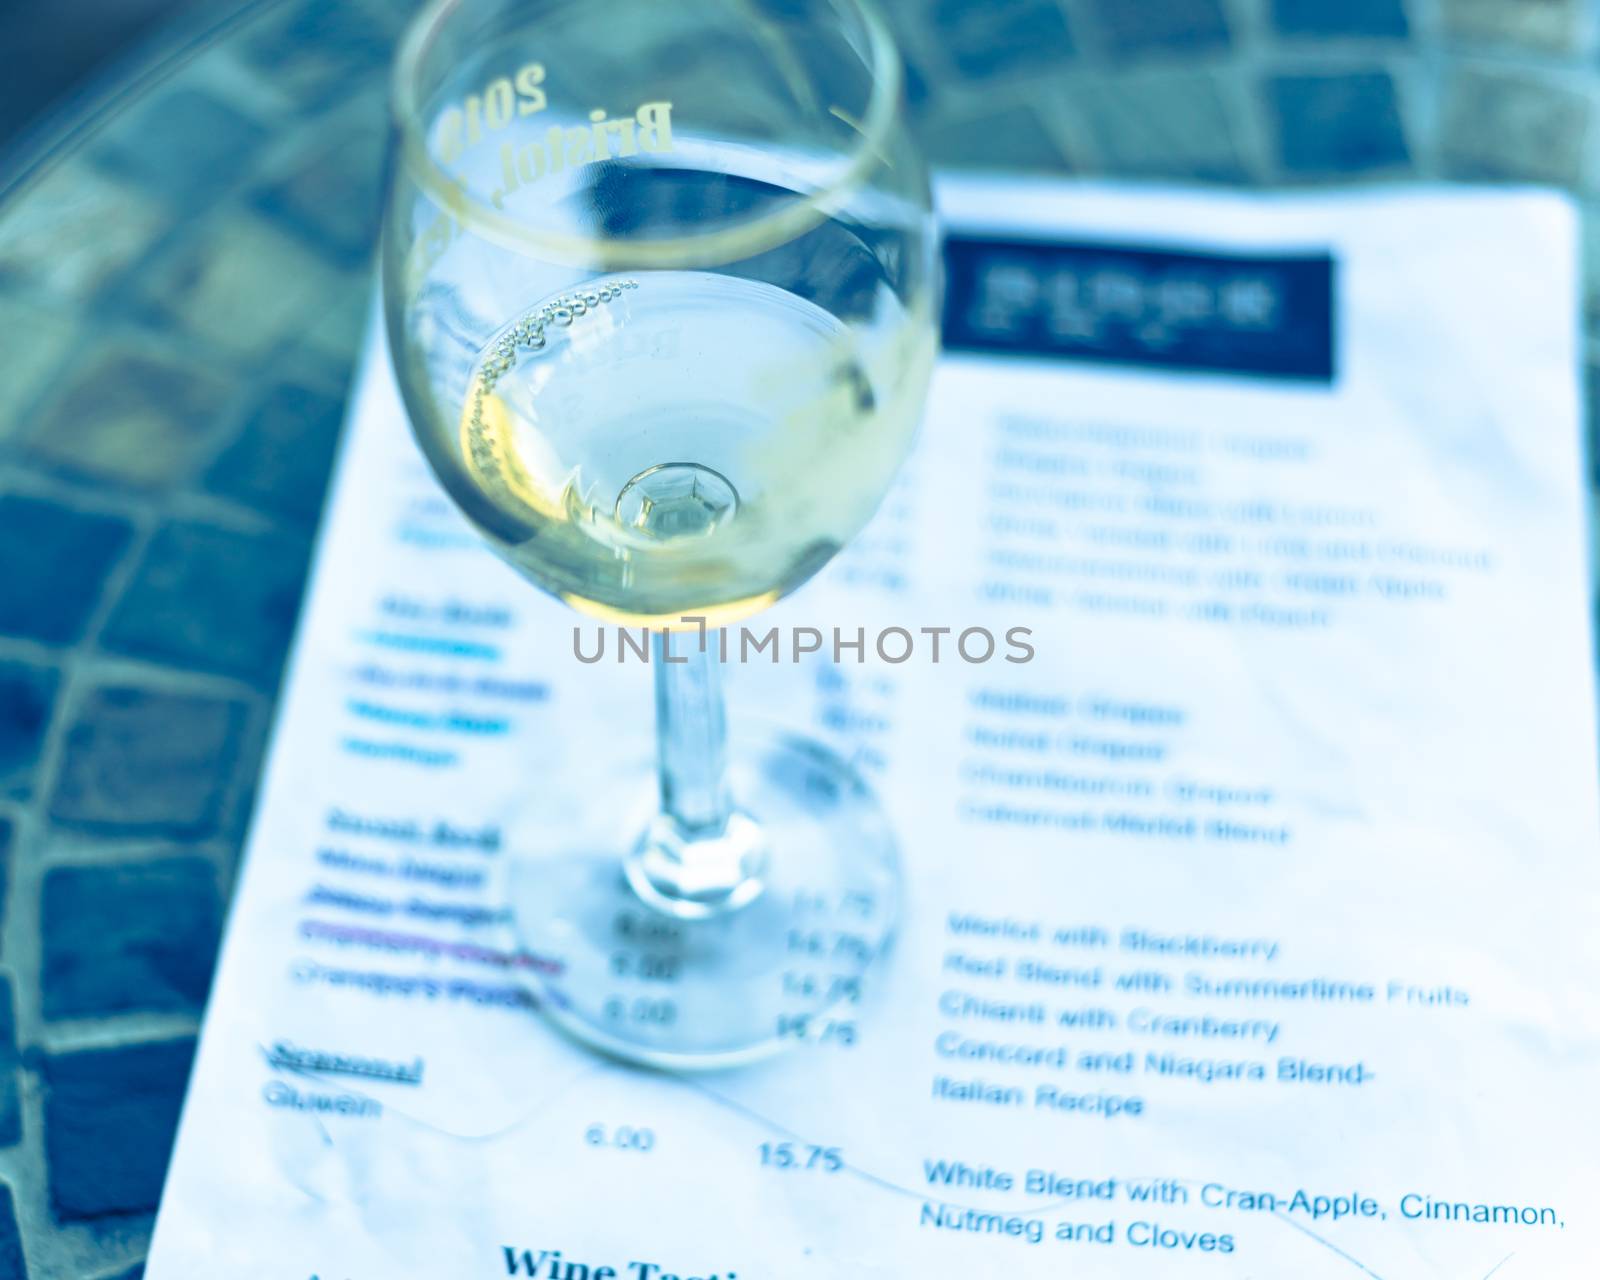 Vintage tone top view a glass of sweet white wine and tasting menu with price at local winery in North Texas, America